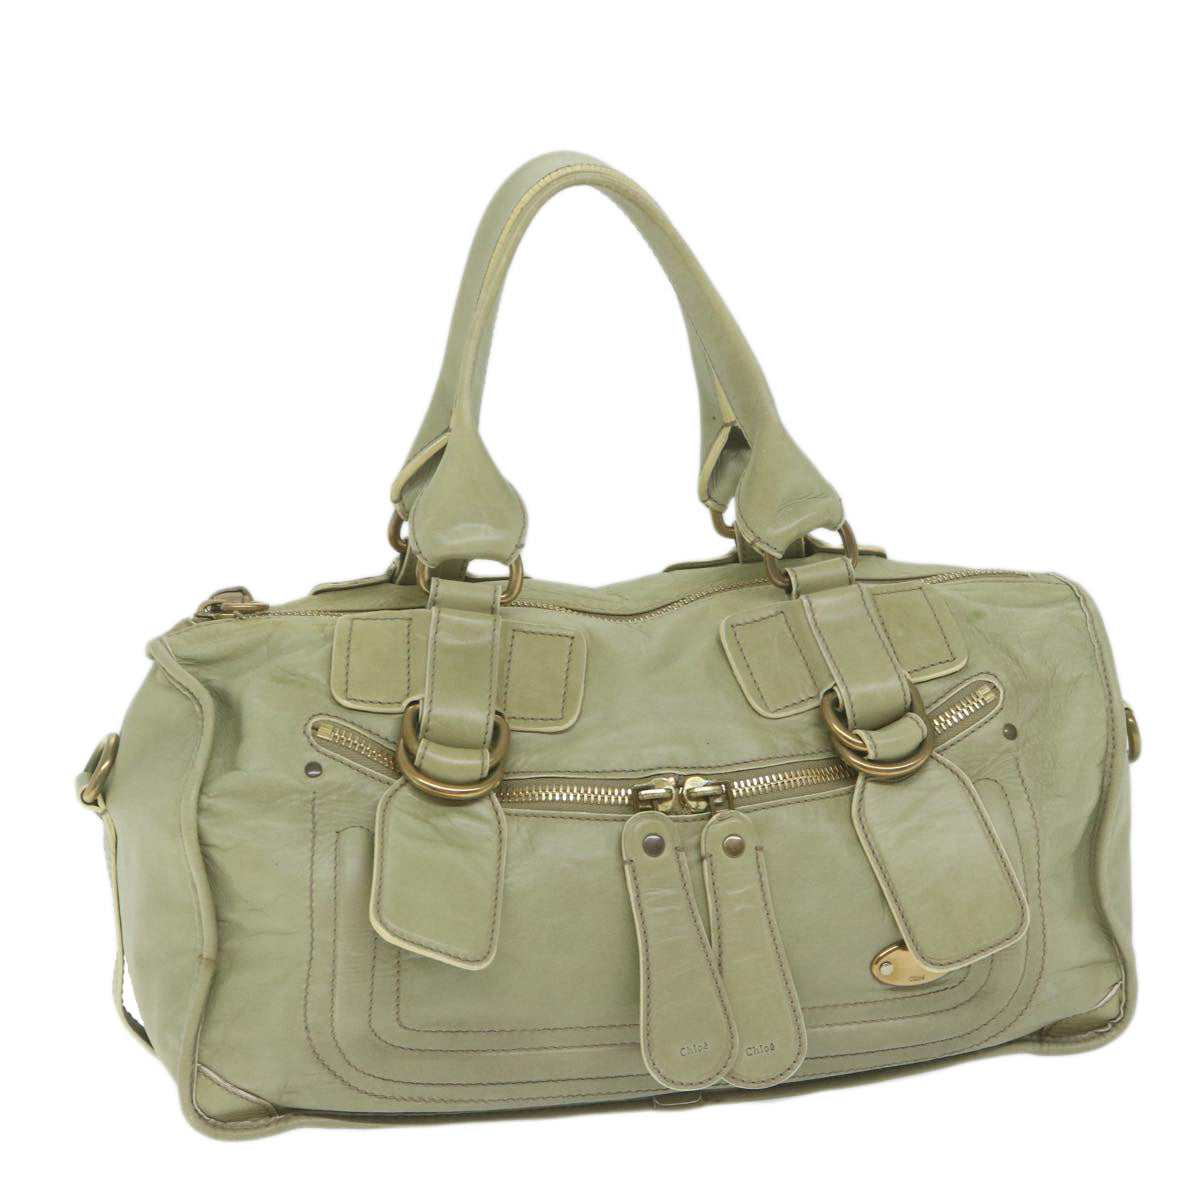 Chloe Hand Bag Leather Green Auth bs11020